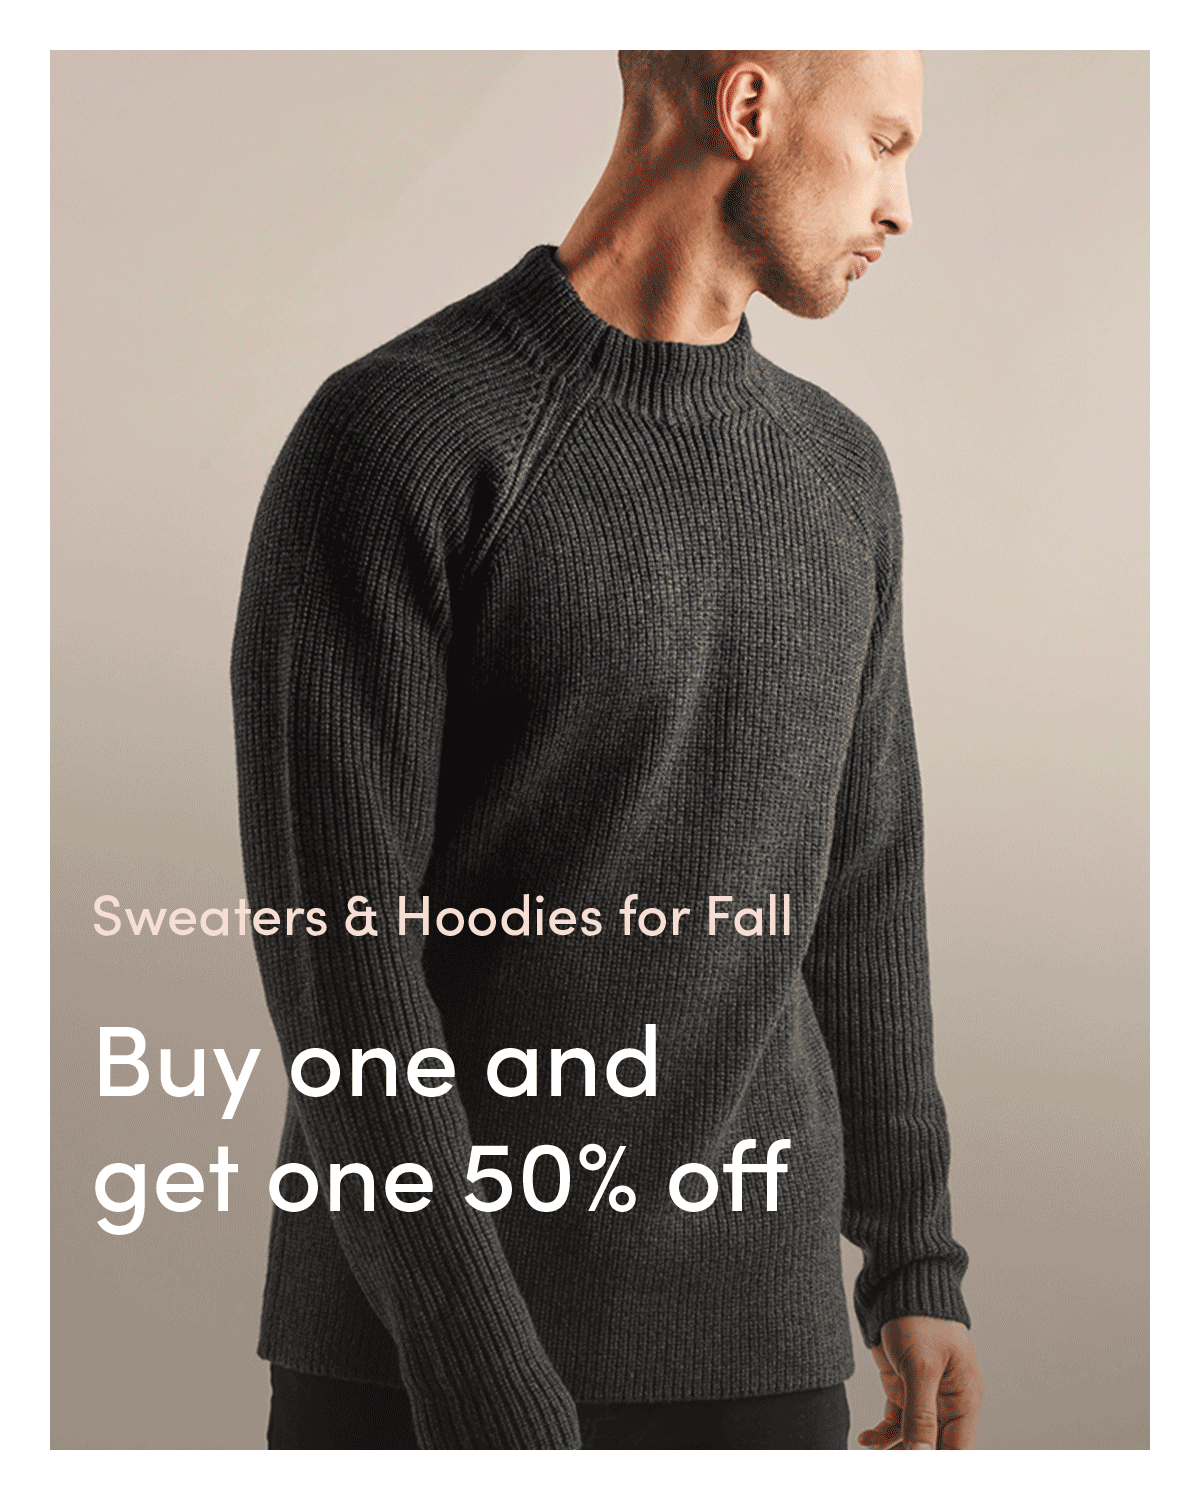 Buy 1, Get 1 50% off Sweaters and Hoodies